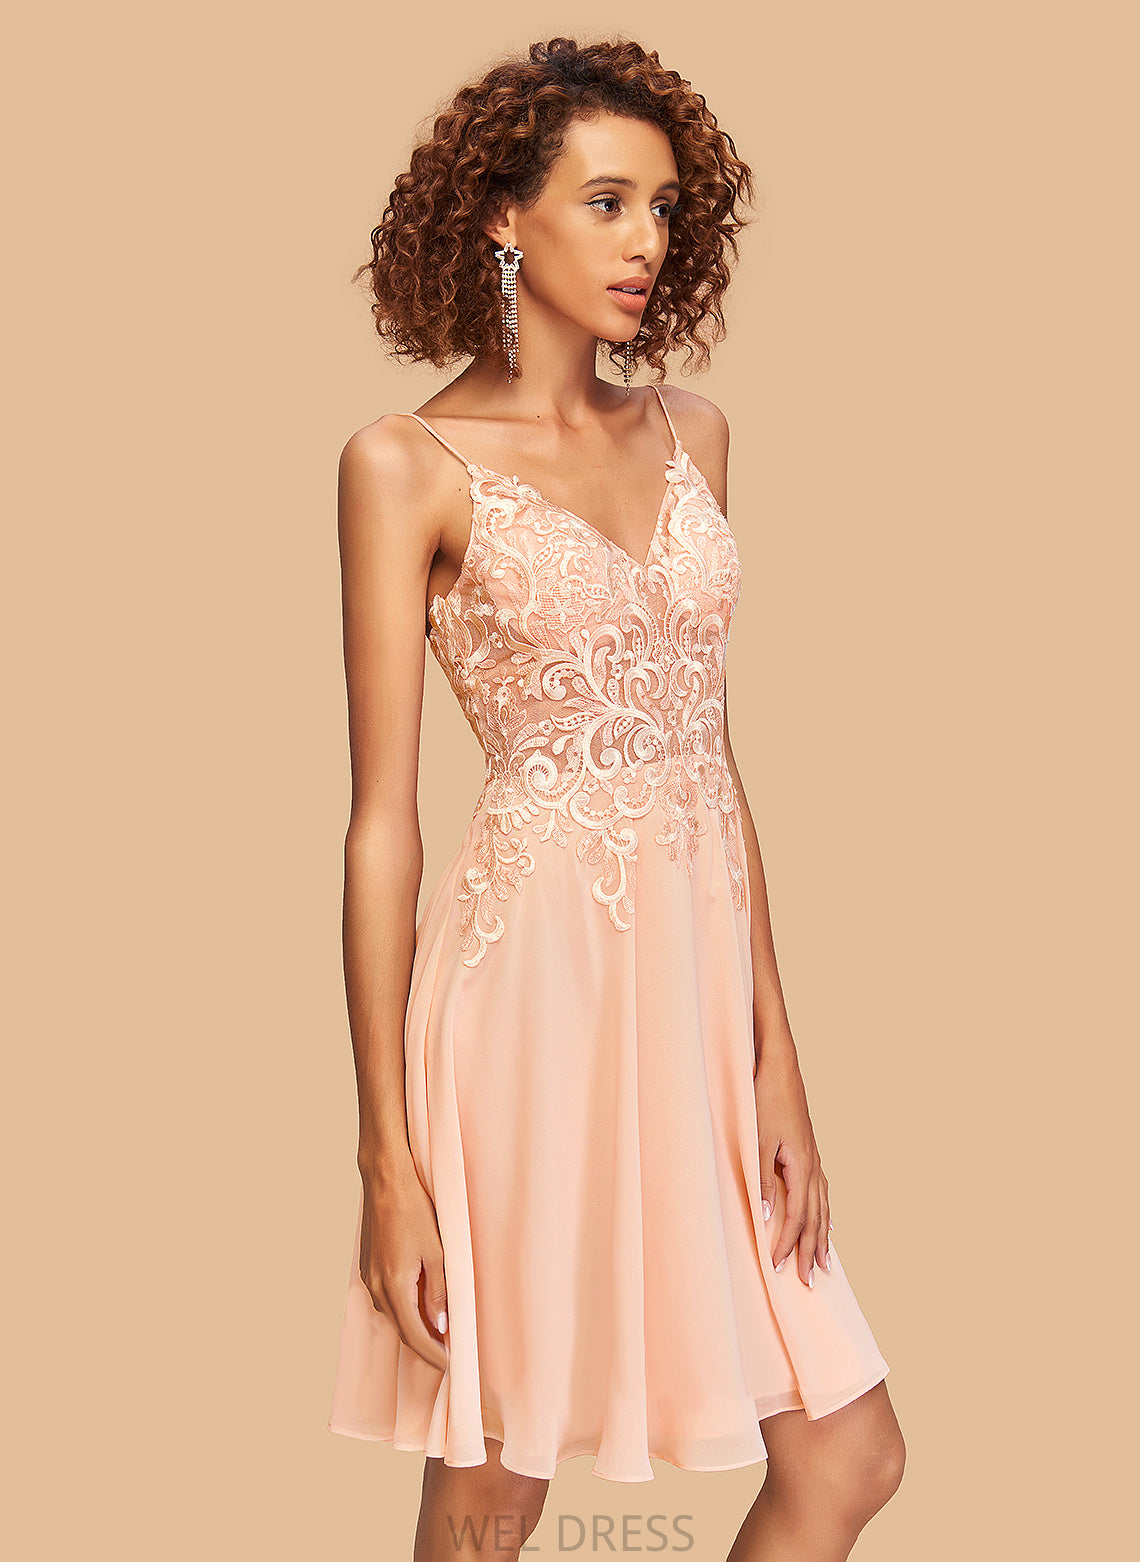 Homecoming Dresses A-Line Chiffon Lace With Dress Marie V-neck Knee-Length Homecoming